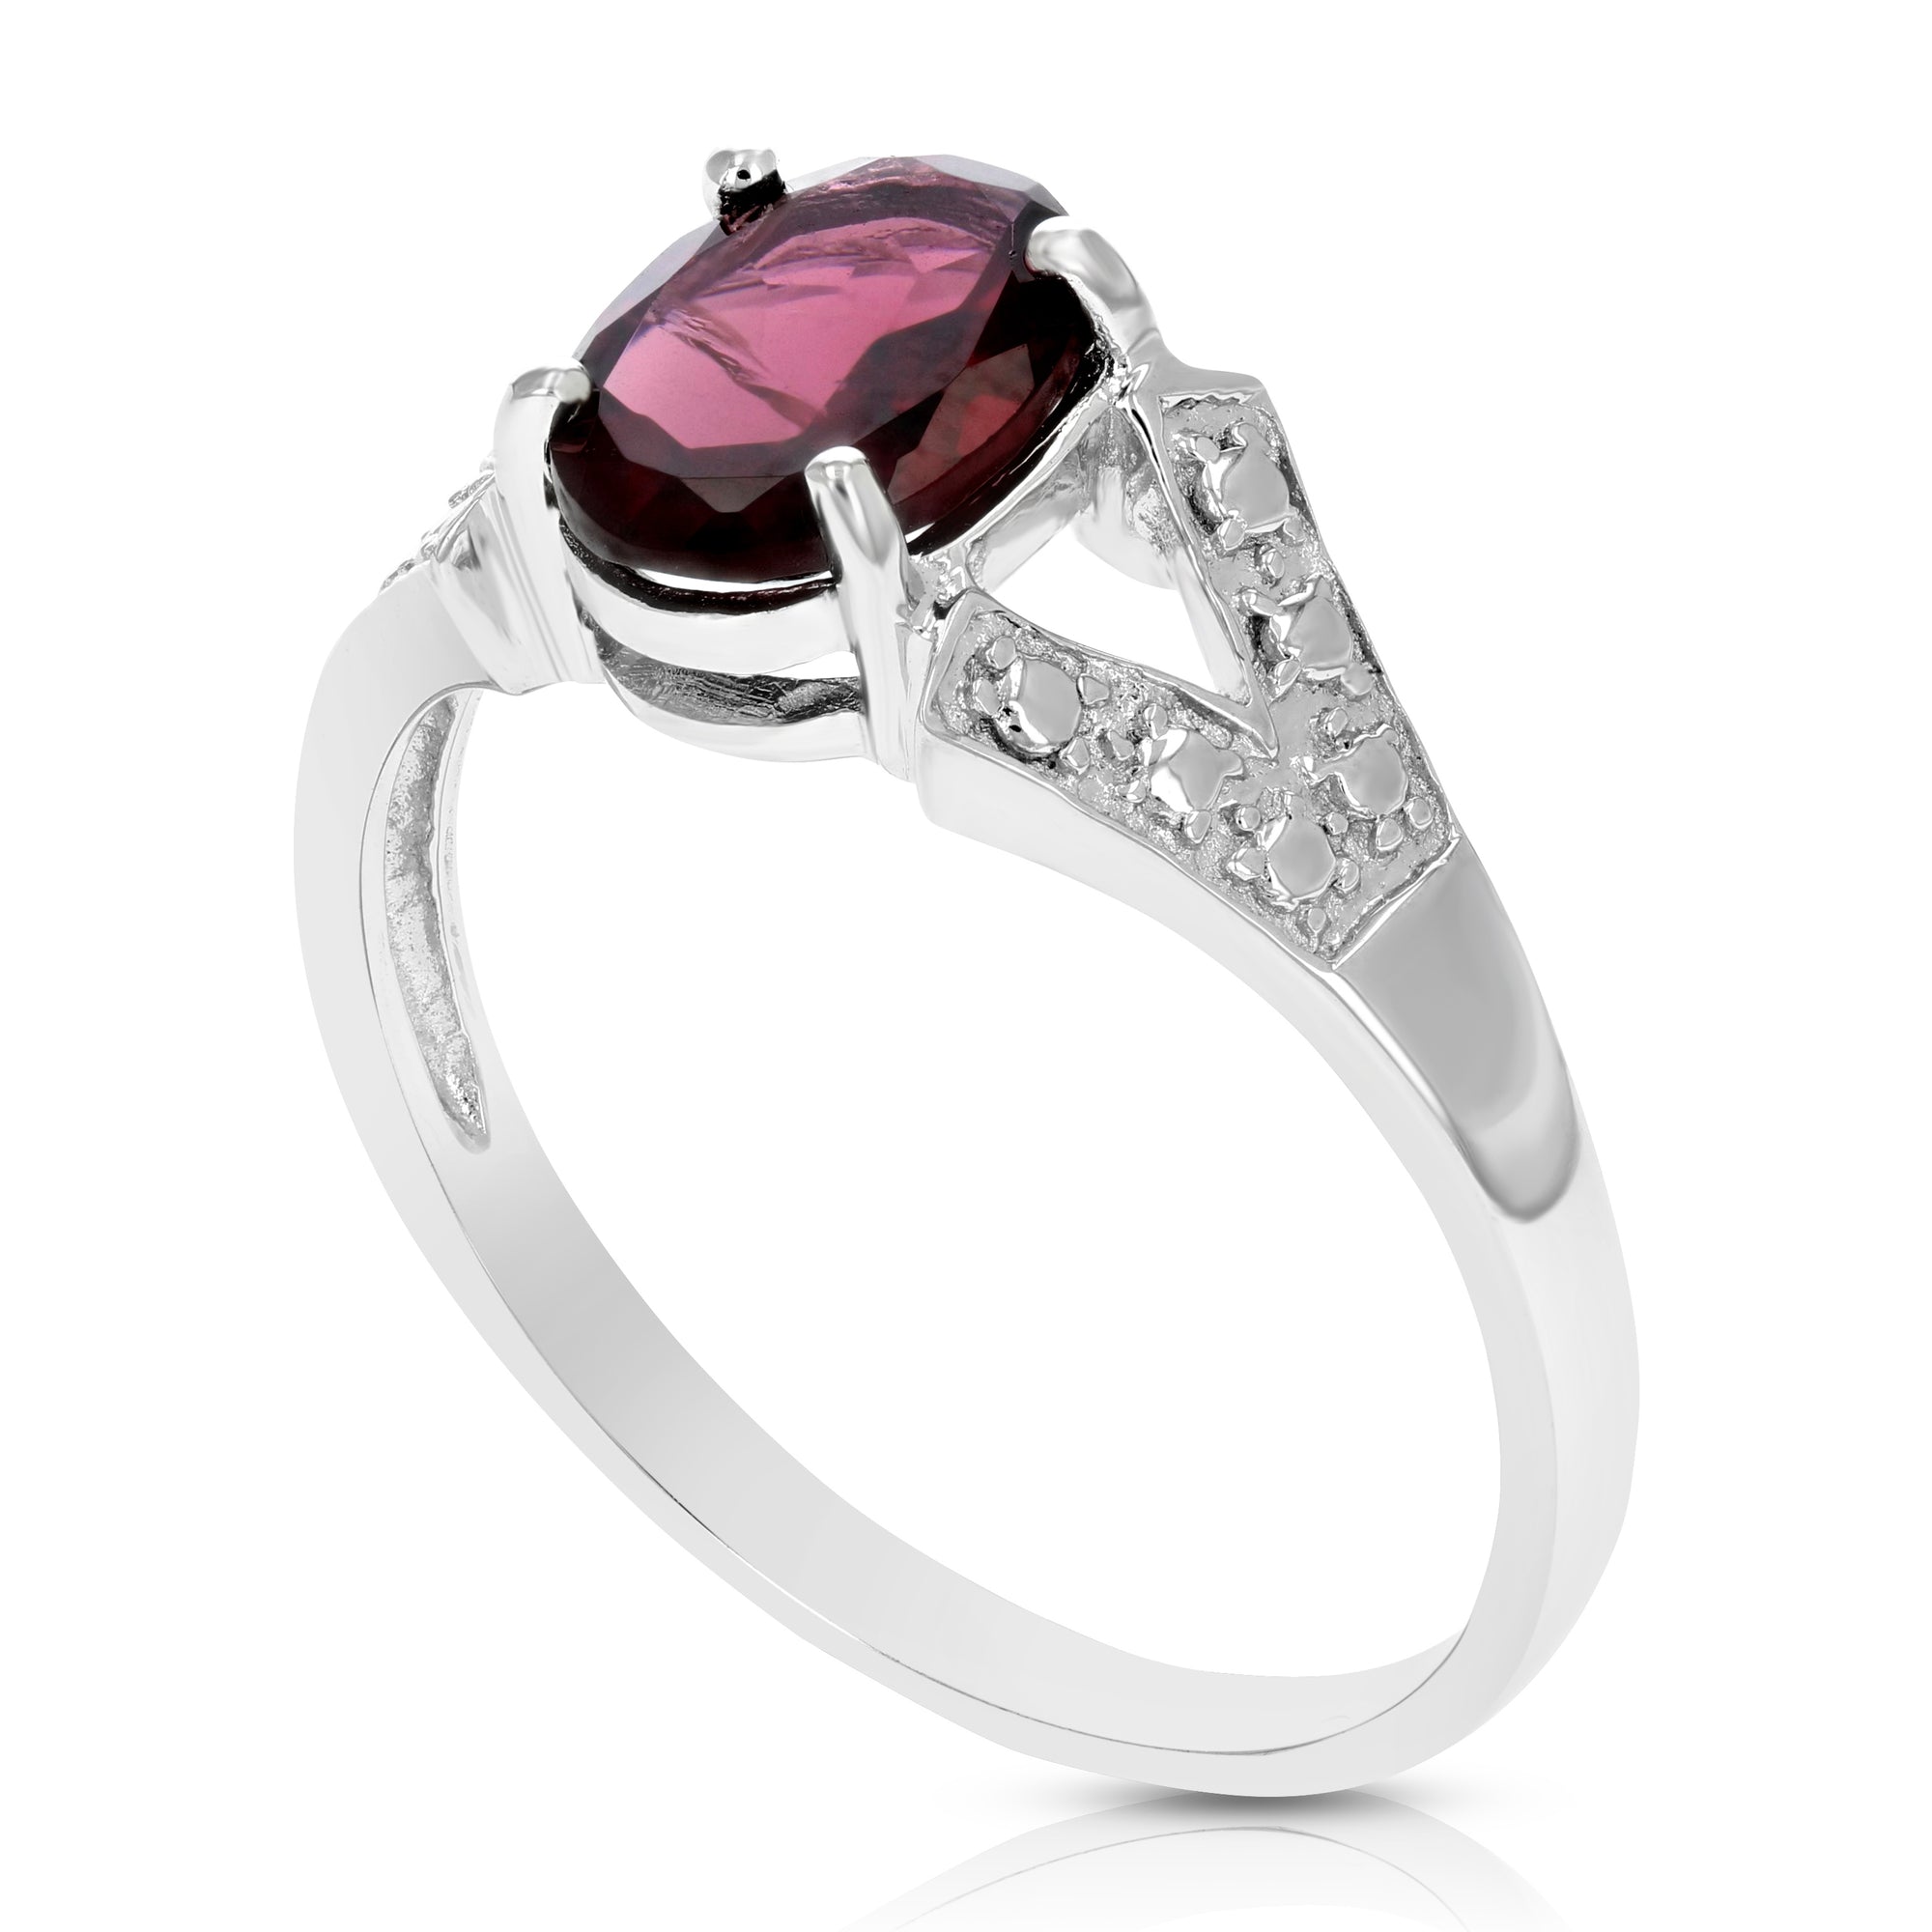 1.20 cttw Garnet Ring .925 Sterling Silver with Rhodium Oval Shape 8x6 MM